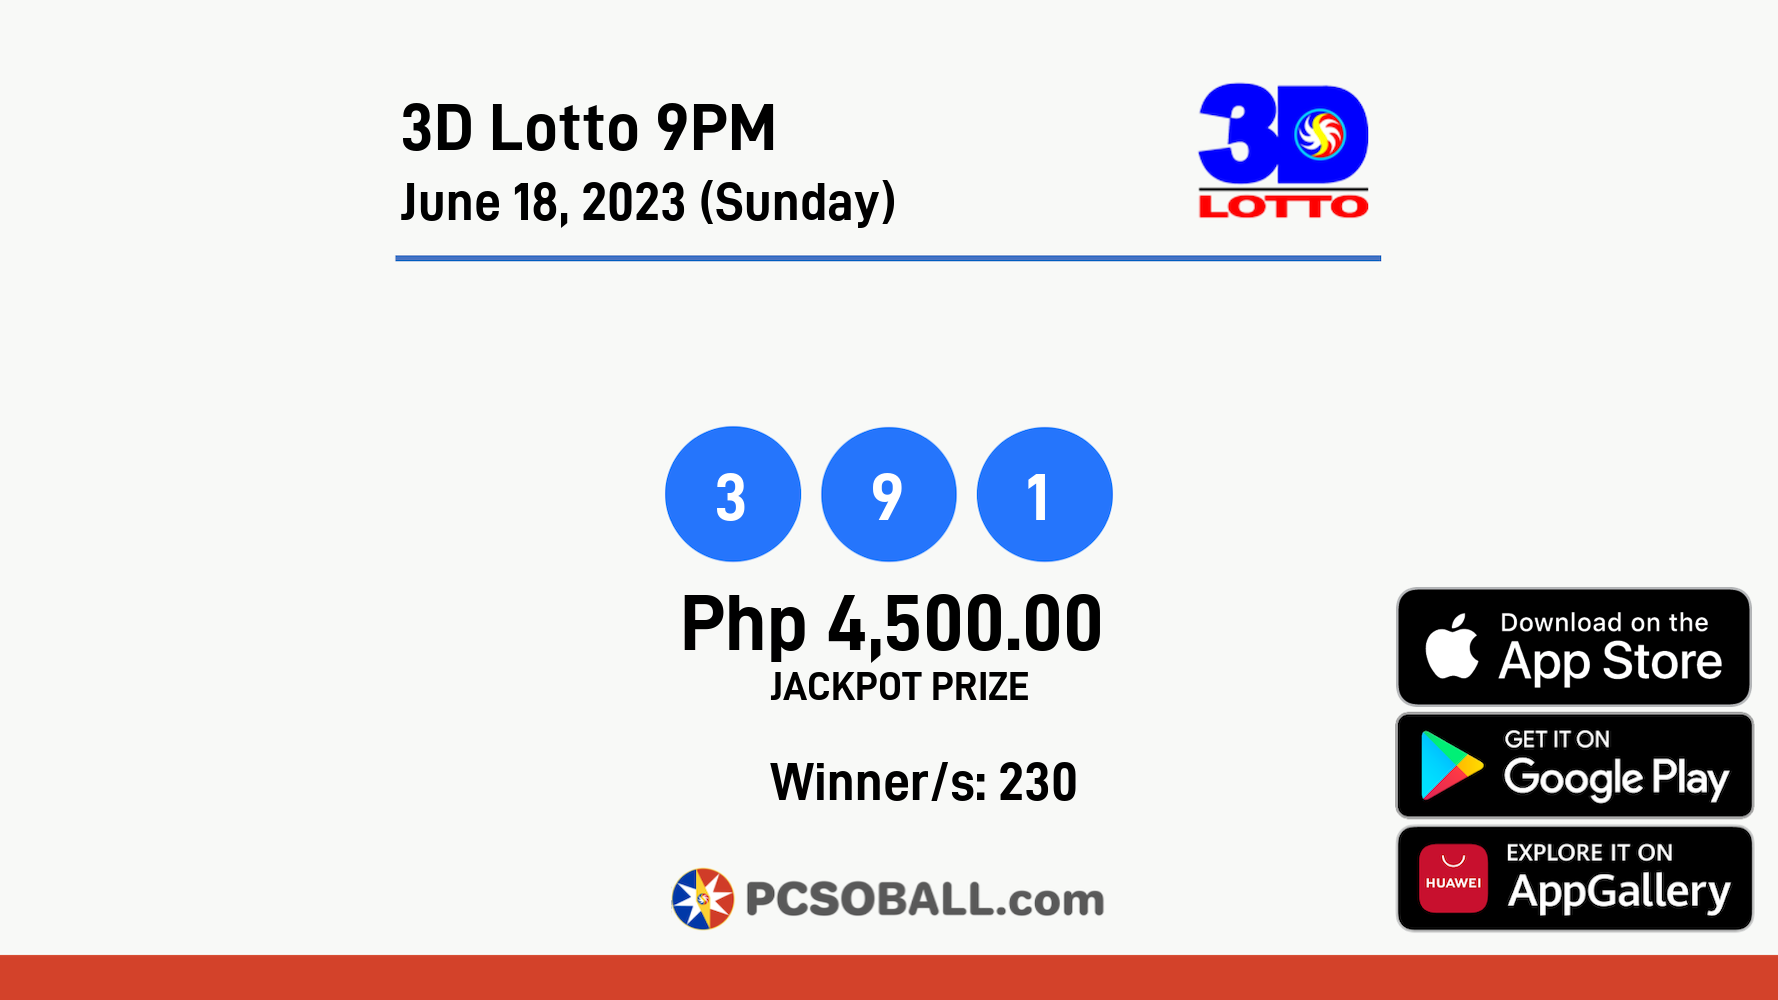 3D Lotto 9PM June 18, 2023 (Sunday) Result